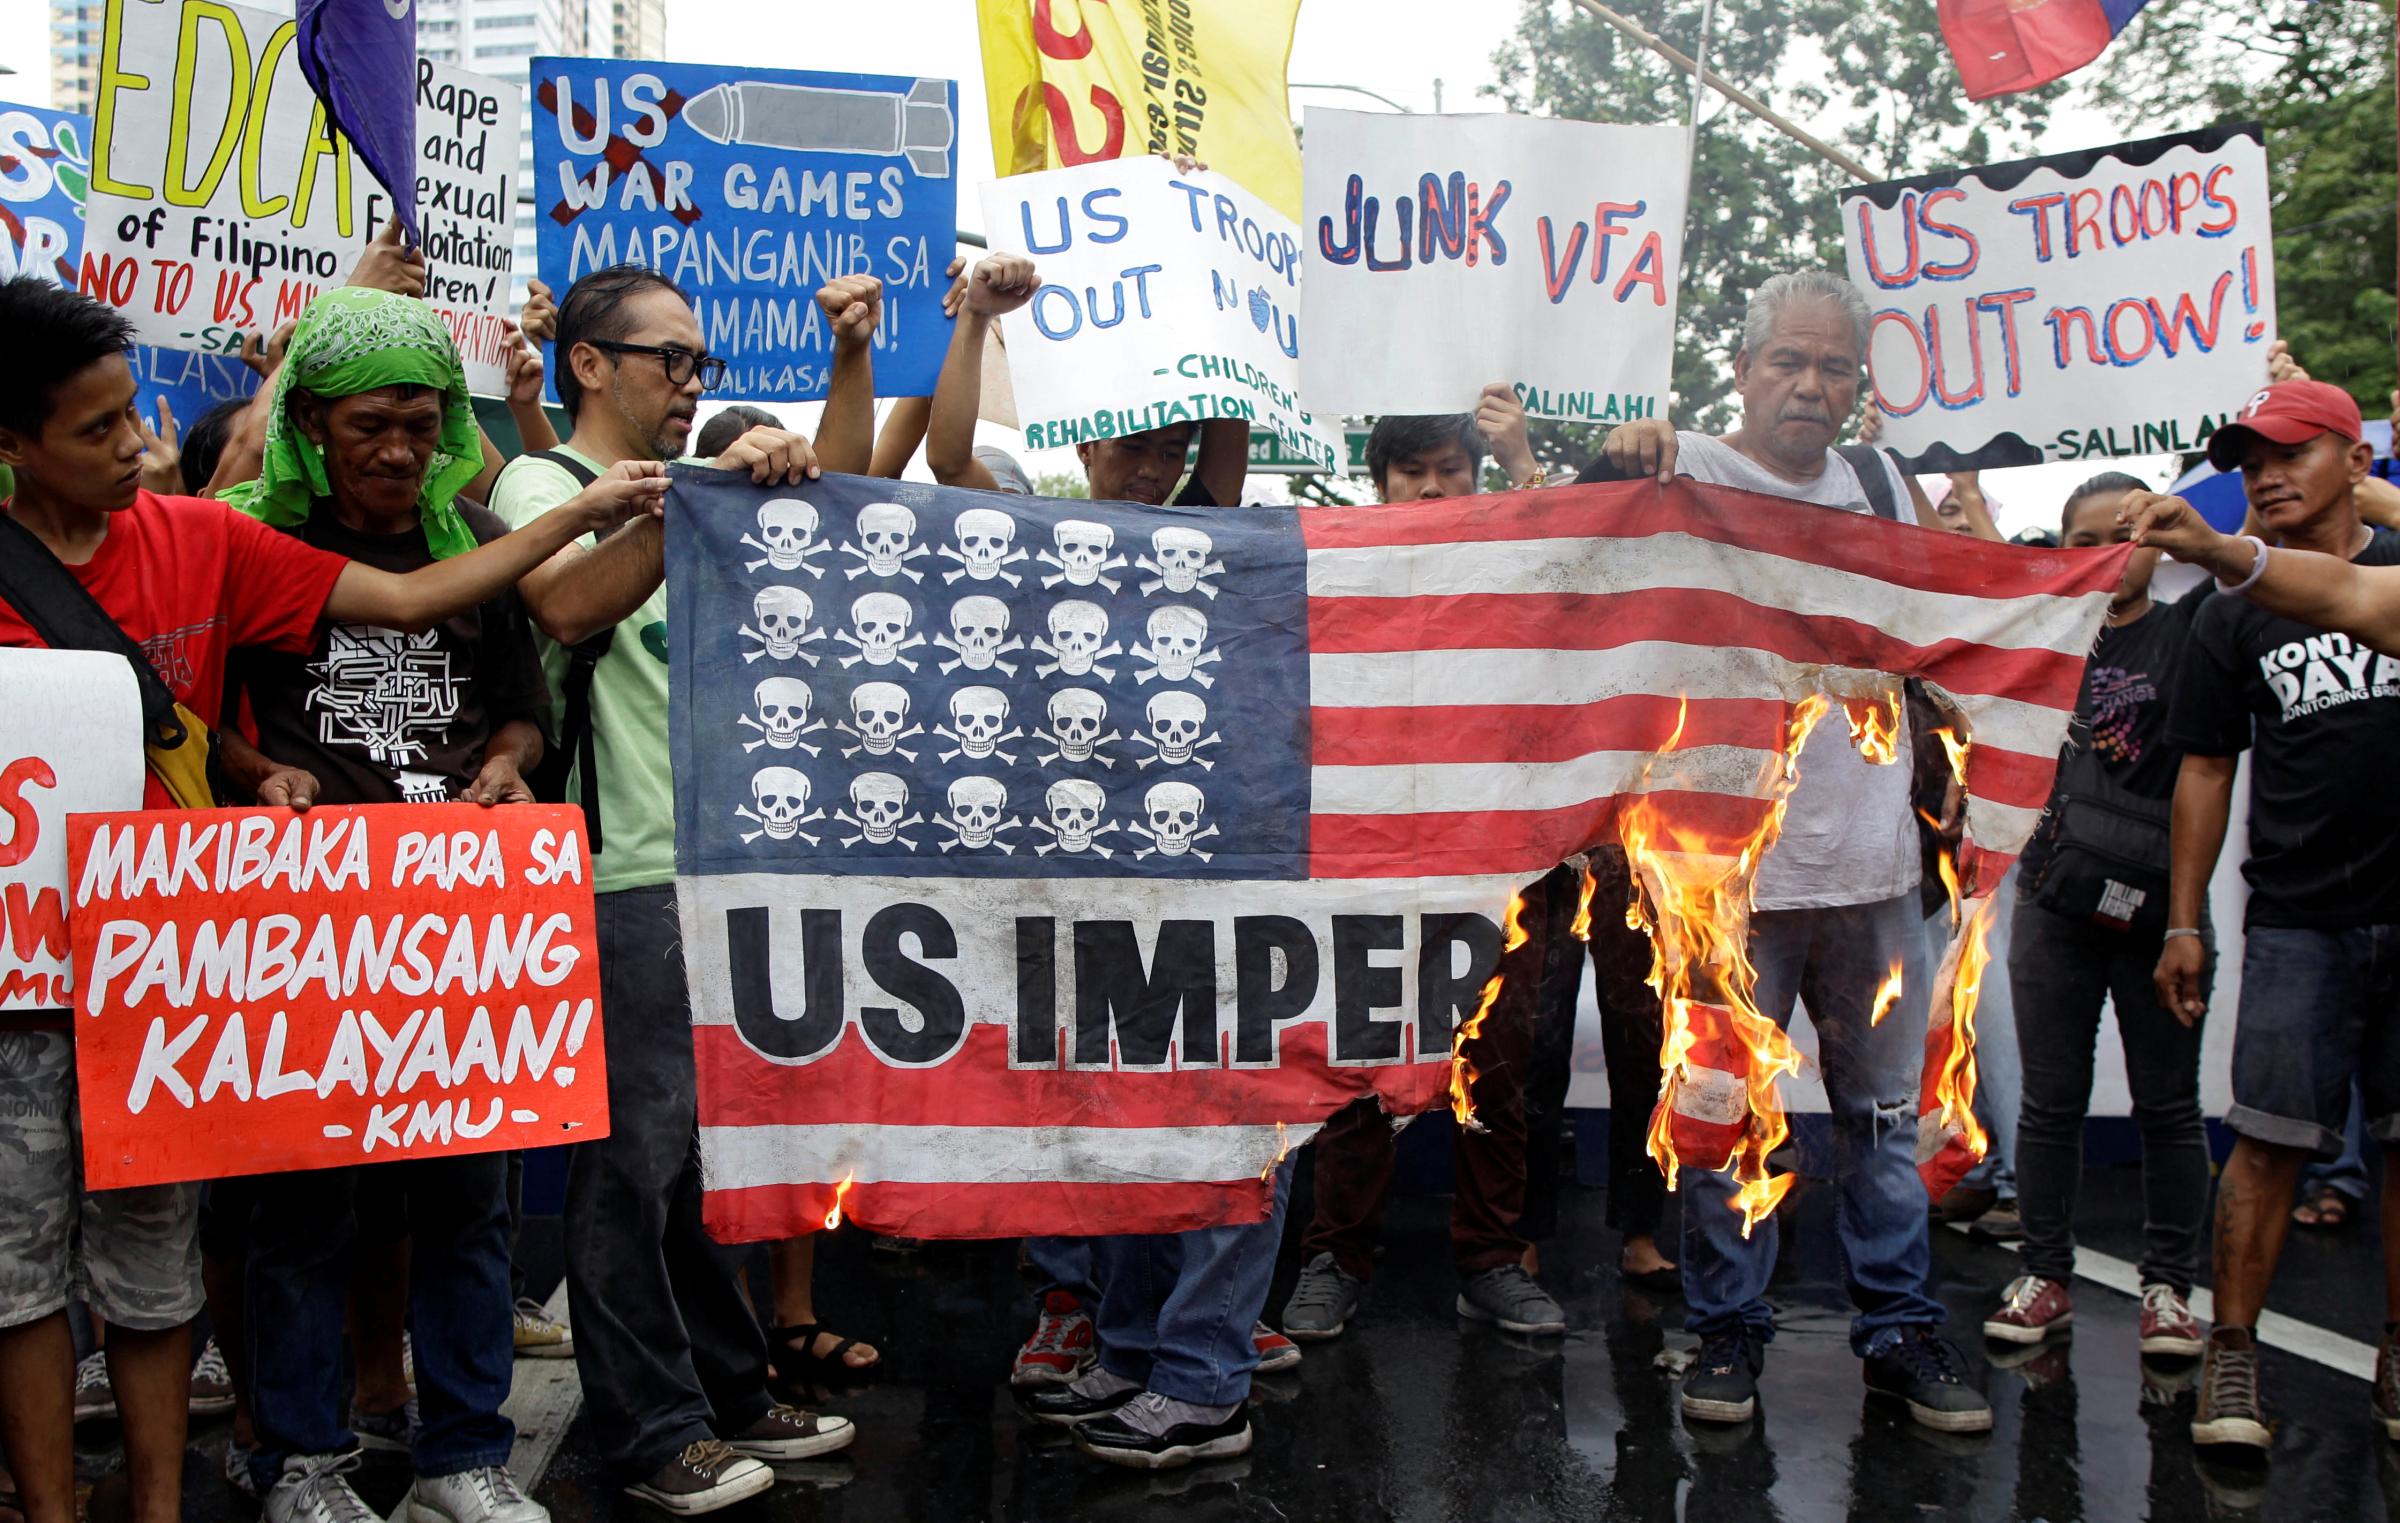 Demonstrators burn a mock U.S. flag during a rally opposing the U.S.-Philippines joint military exercises outside the U.S. embassy in Manila